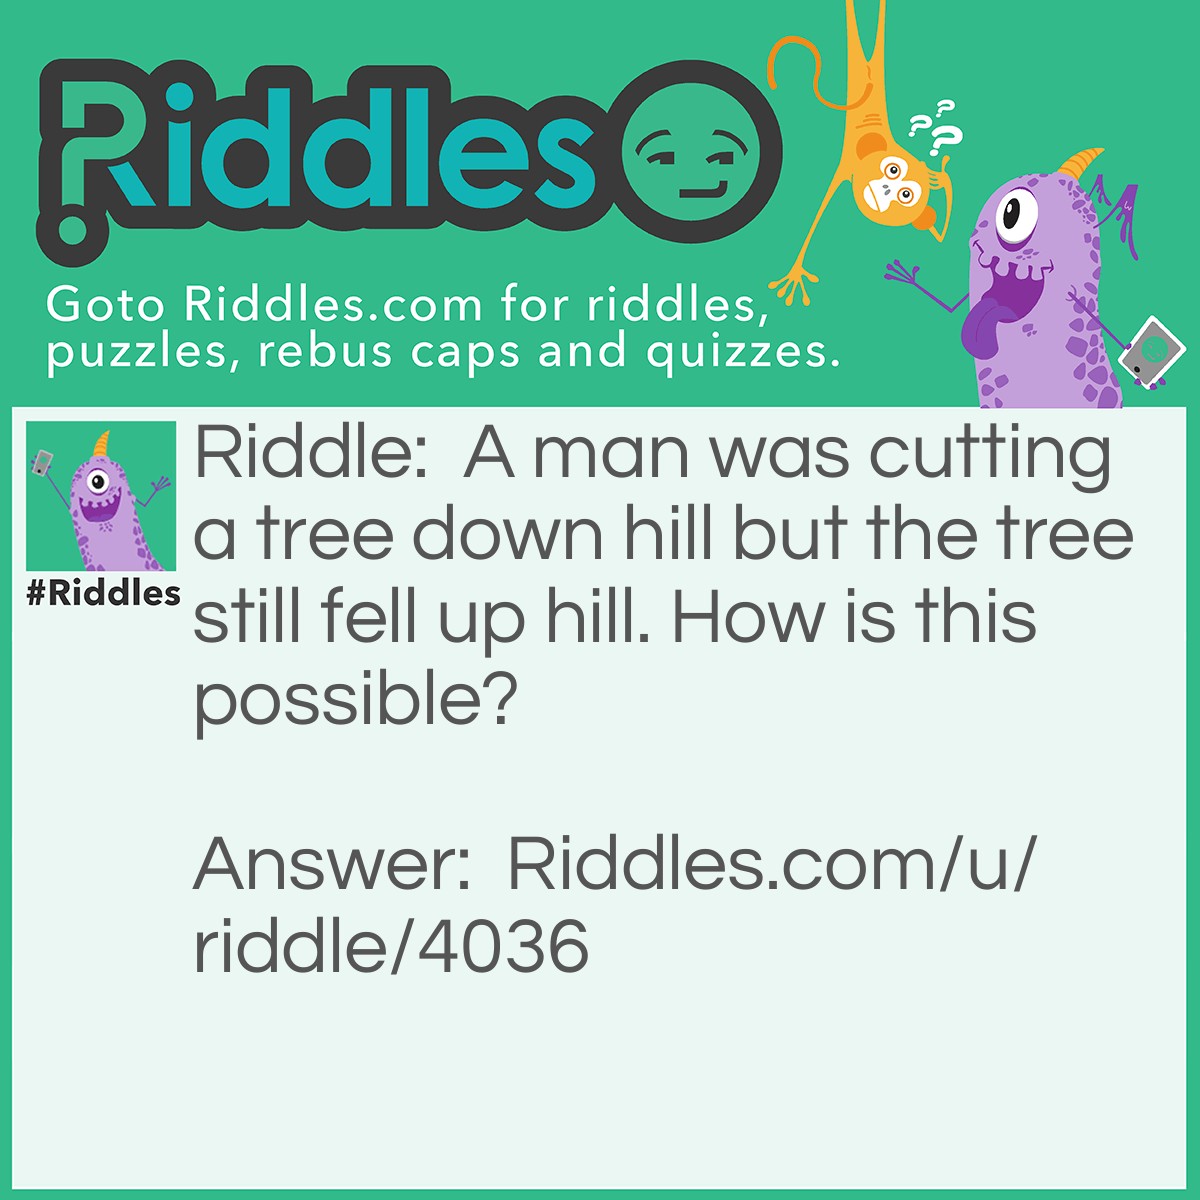 Riddle: A man was cutting a tree down hill but the tree still fell up hill. How is this possible? Answer: He had a rope tied to it.